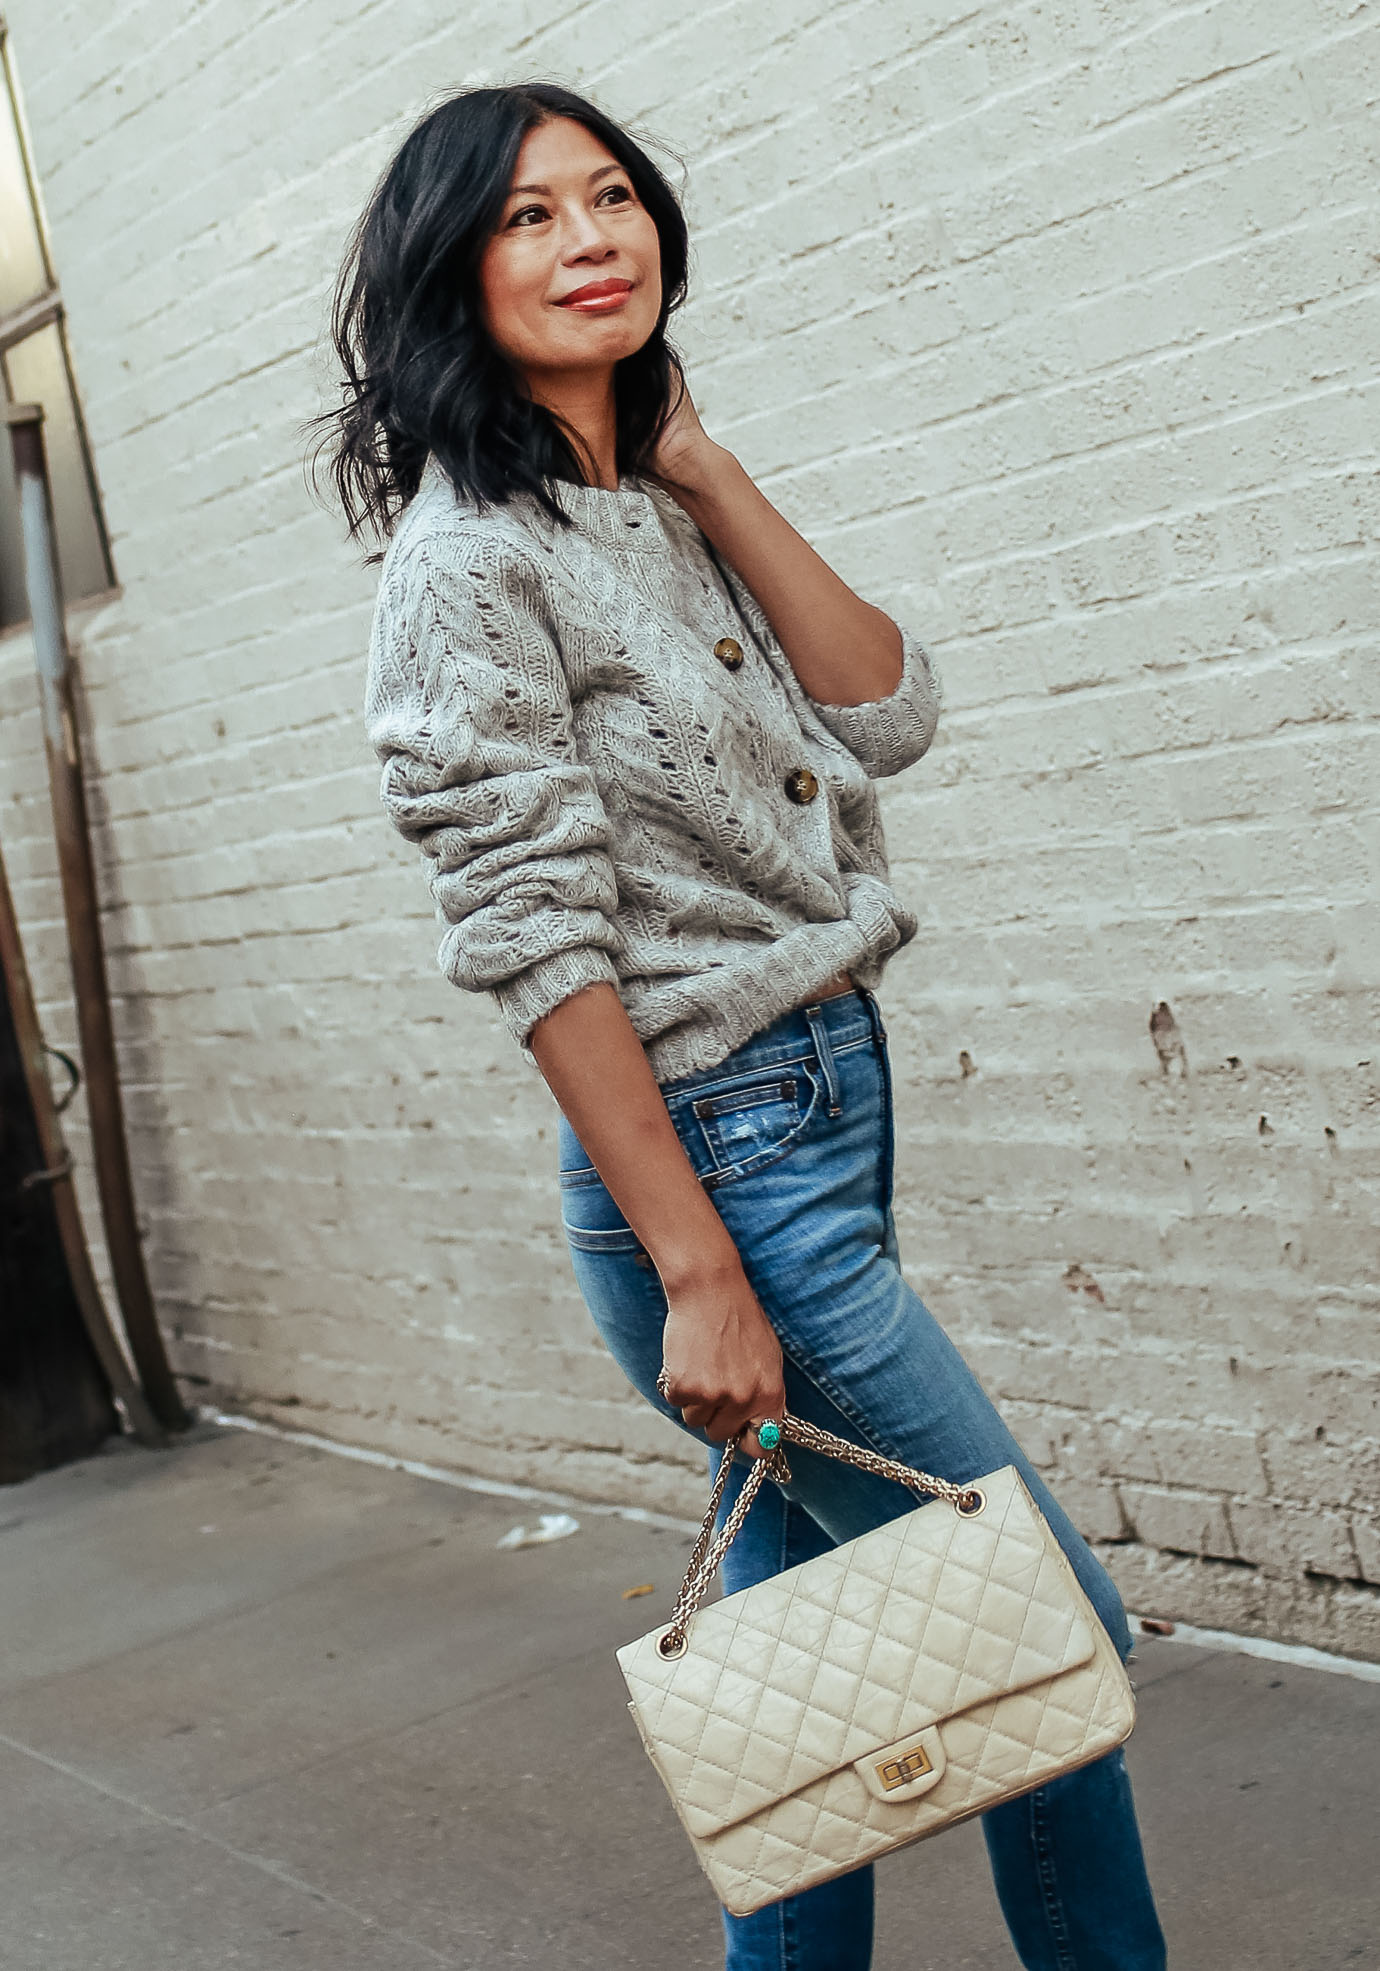 Chic at Every Age, Spring Cardigan Under $100